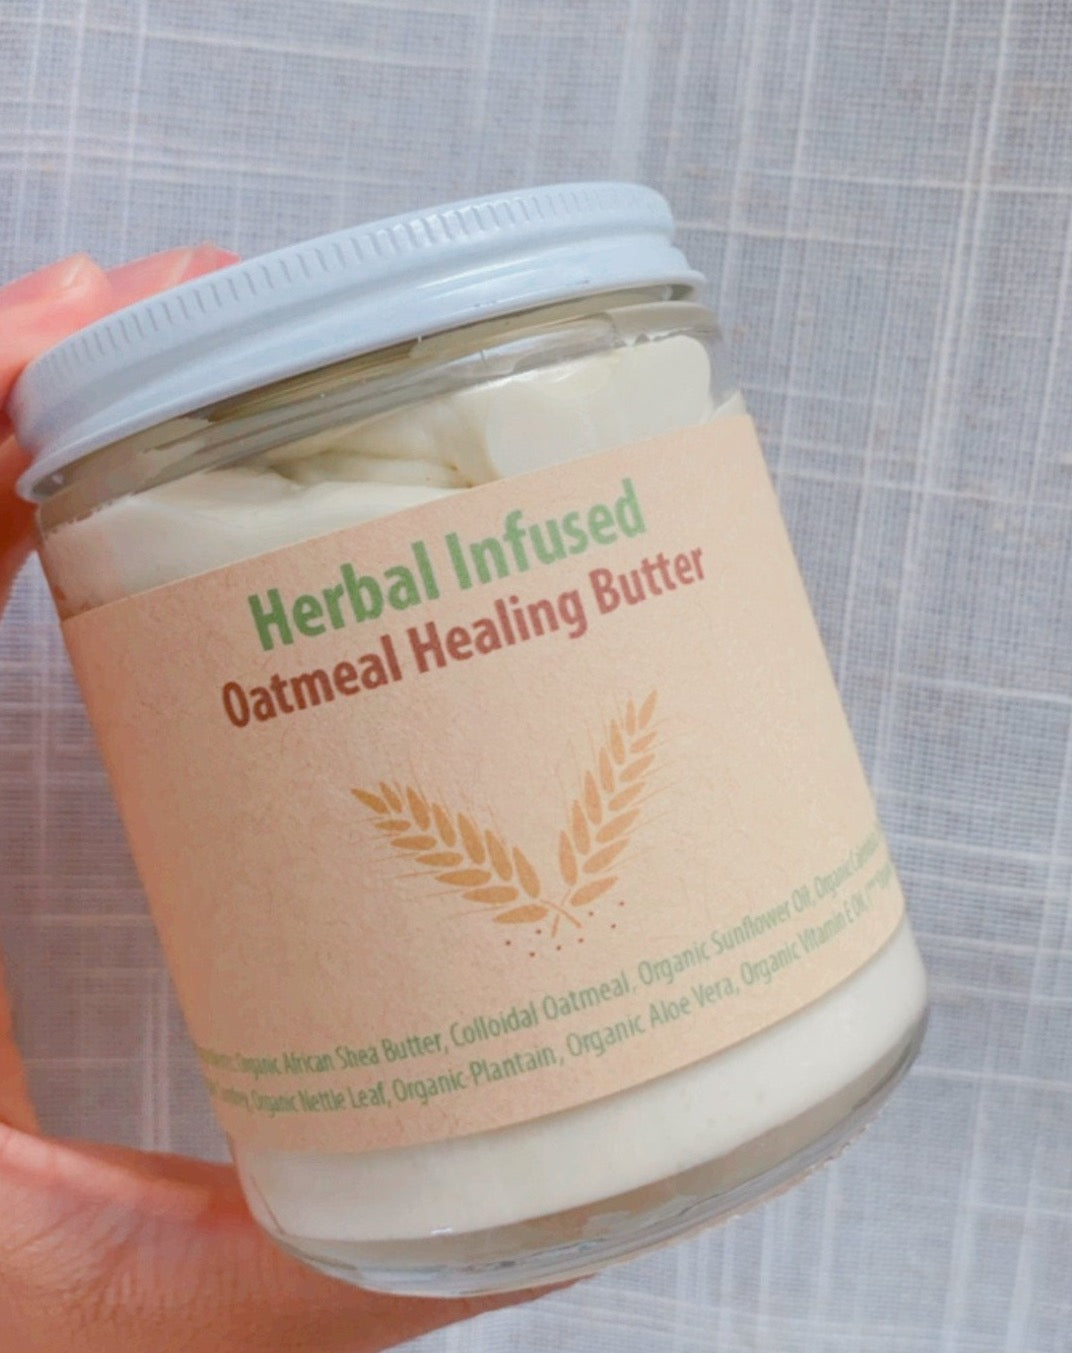 Herbal Infused Oatmeal Healing Butter